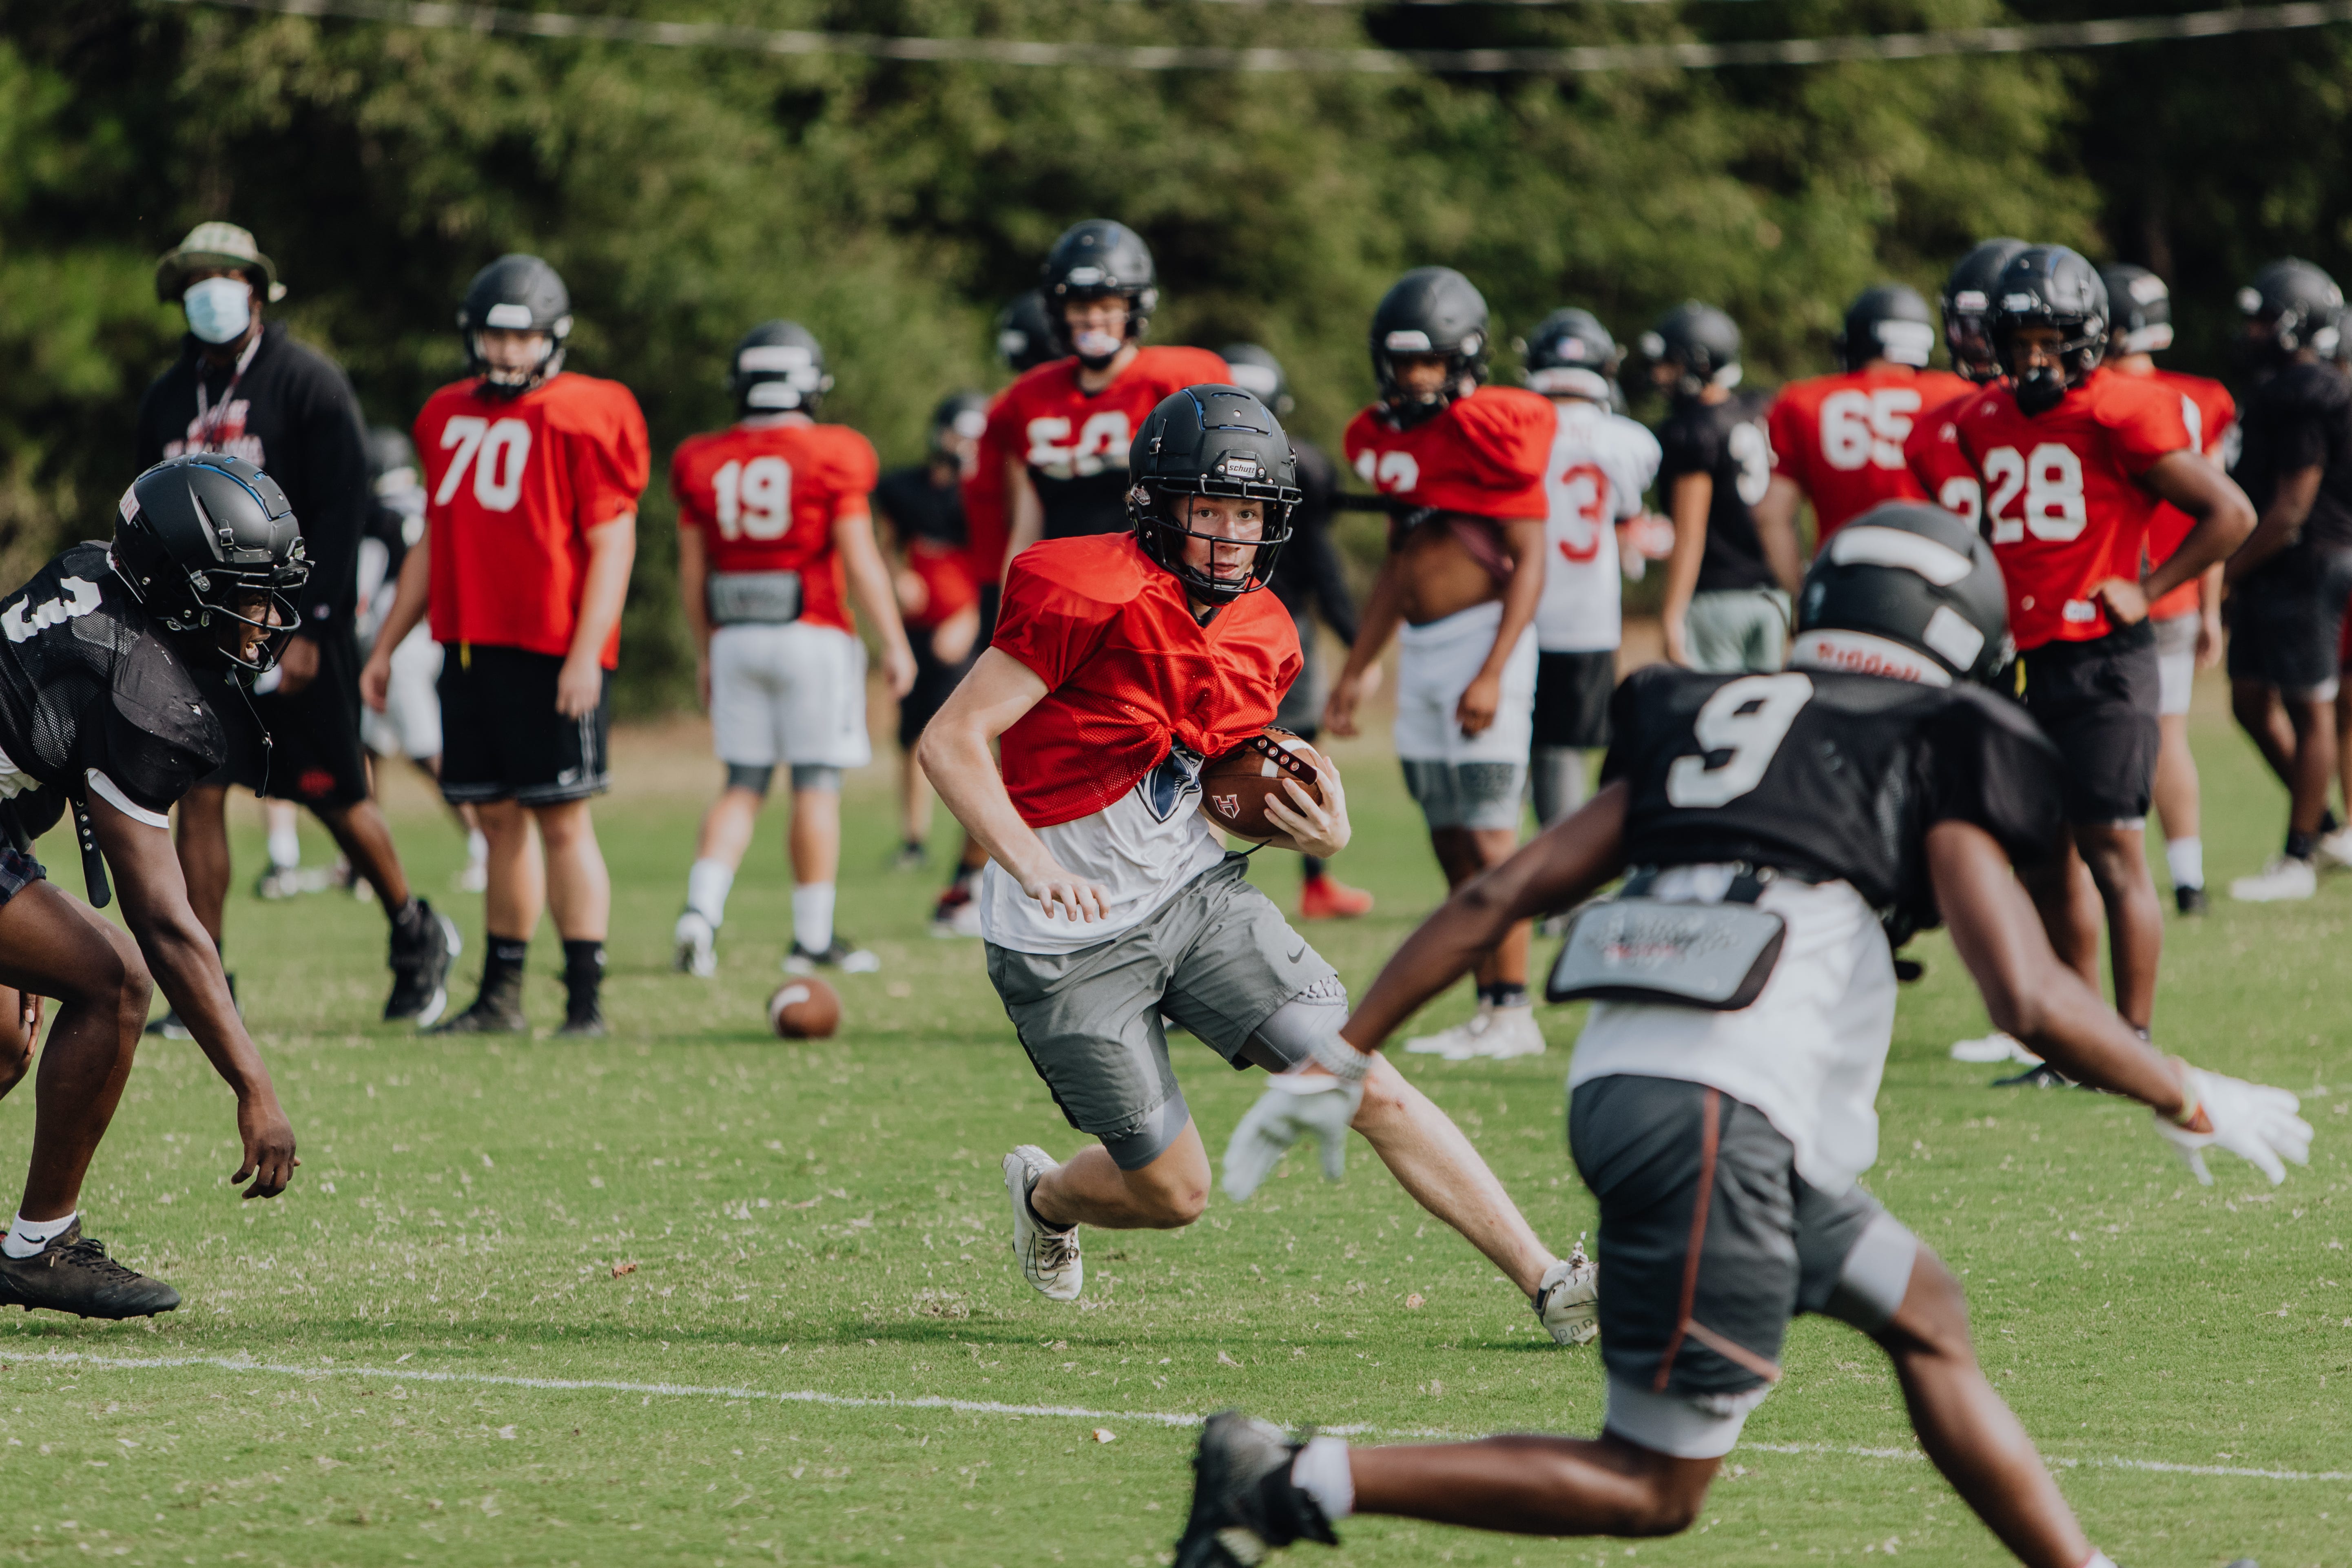 Hillcrest High School football players run through plays during practice Tuesday, Sept. 15, 2020.